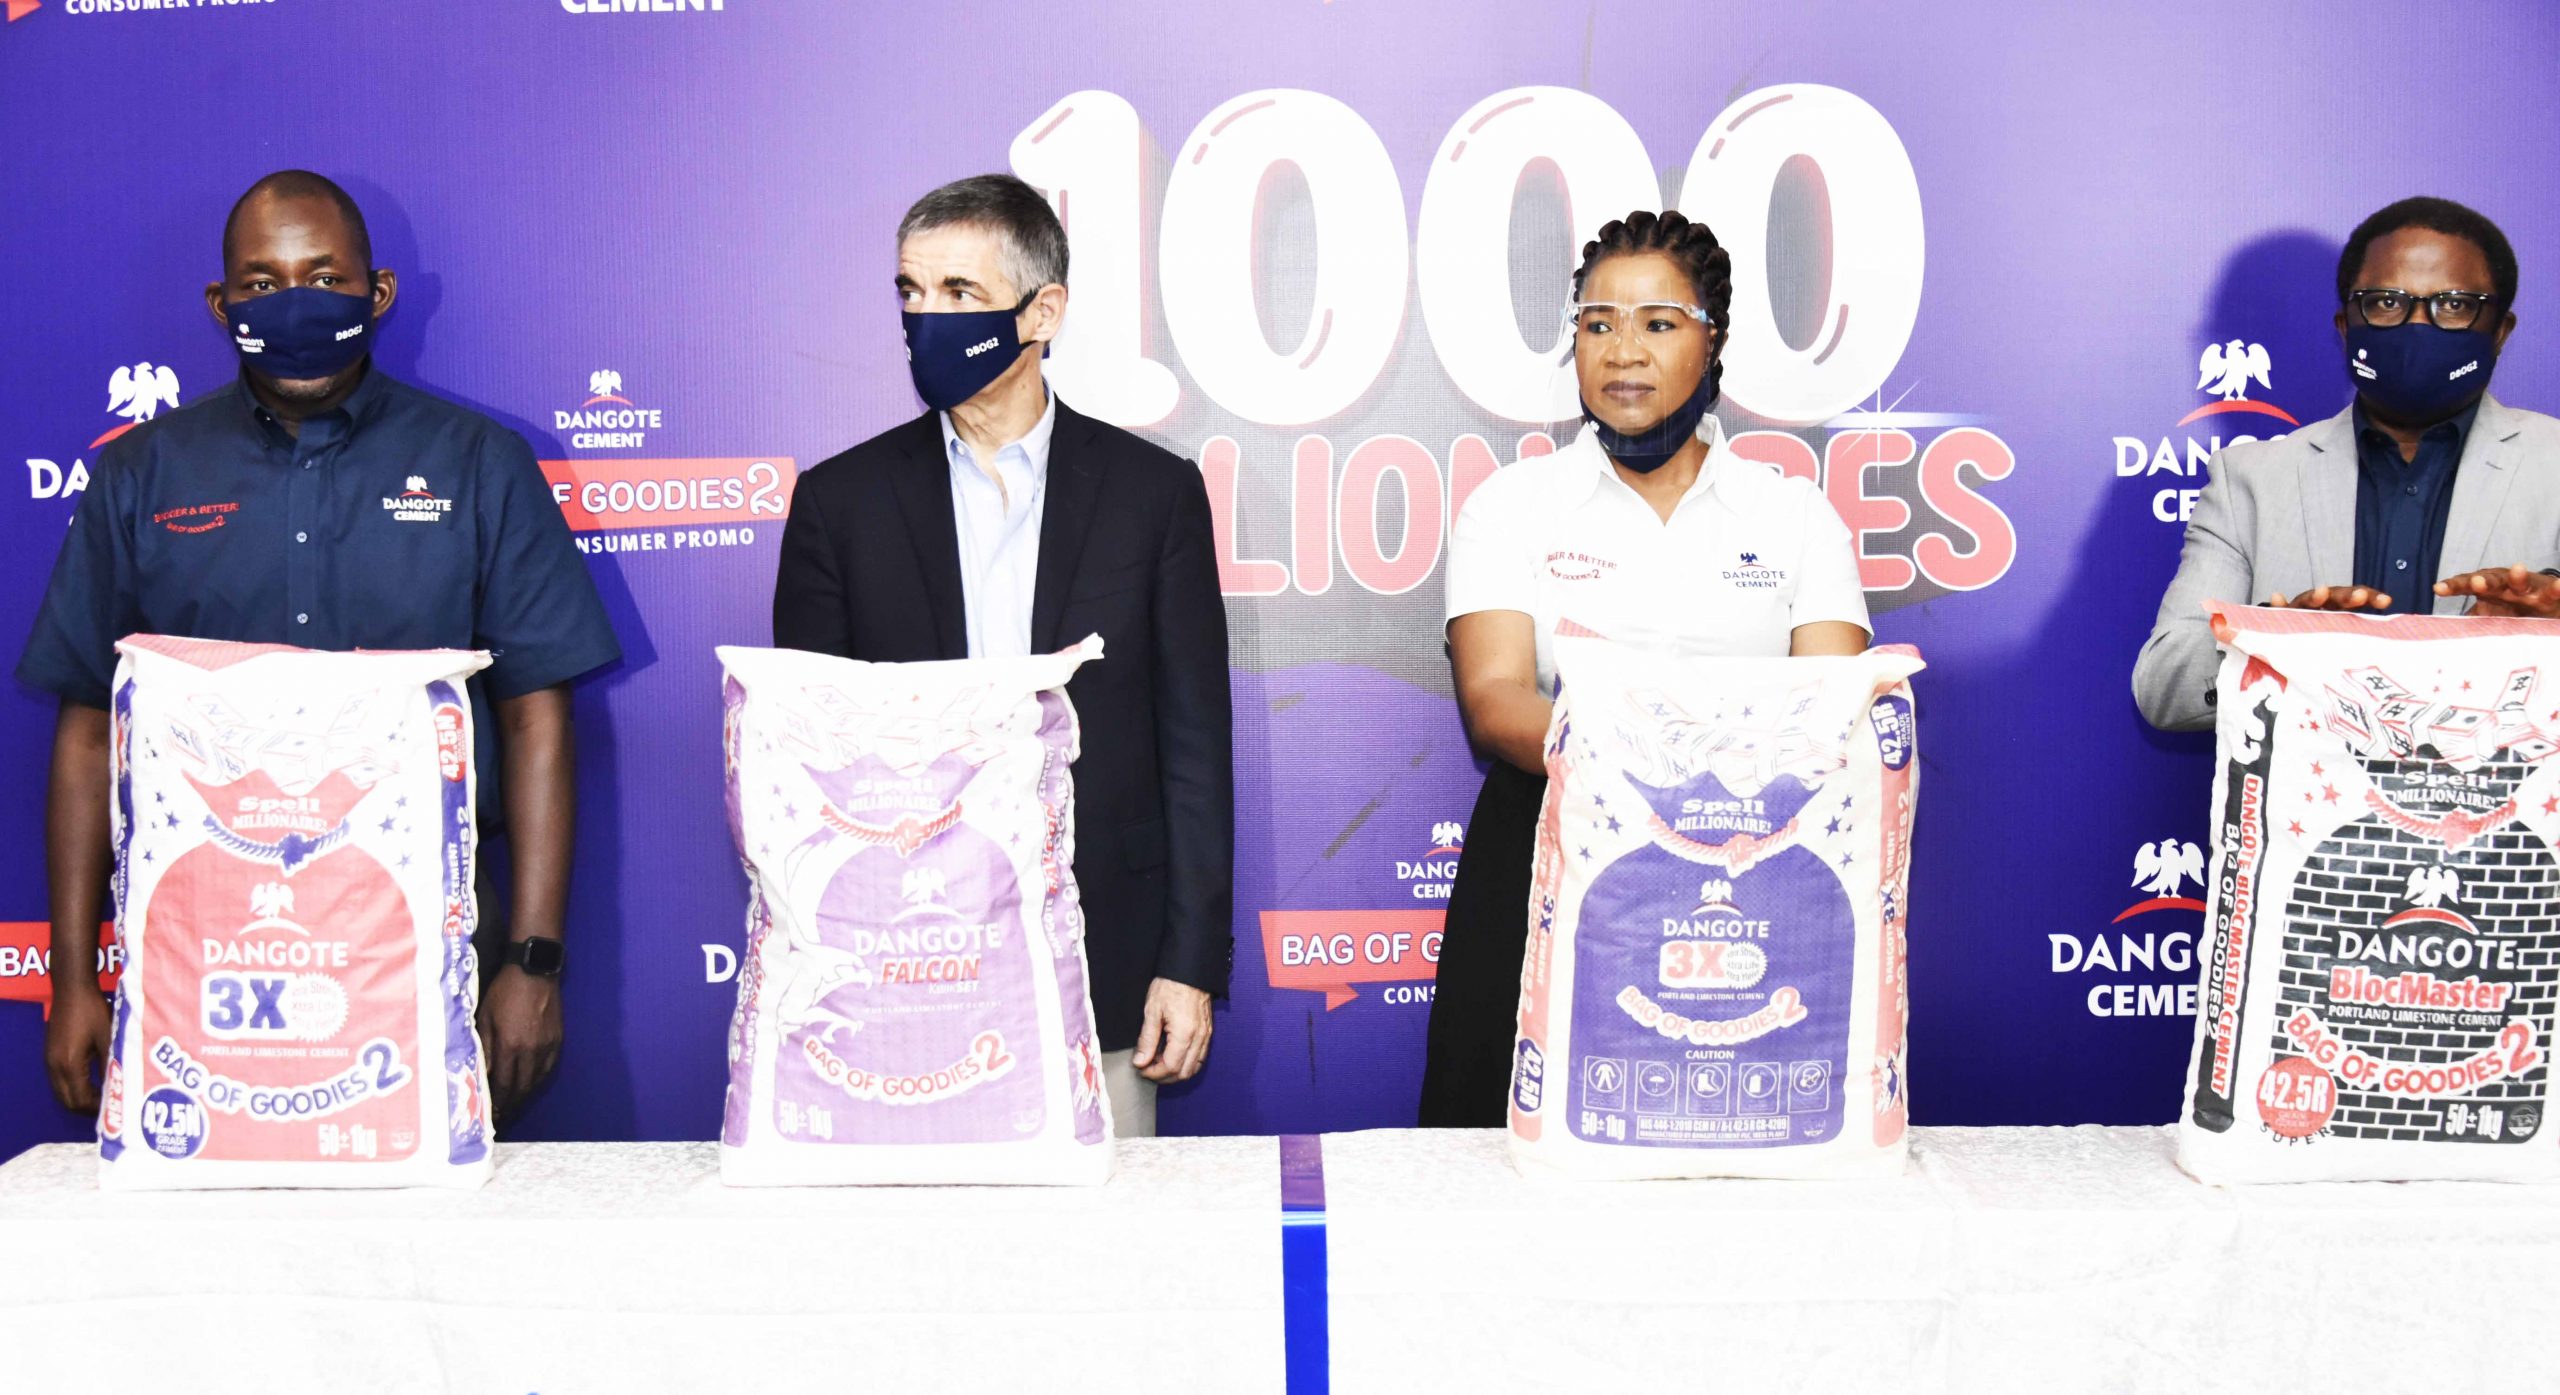 Dangote Cement Promo To Produce 1,000 Millionaires In Four Months